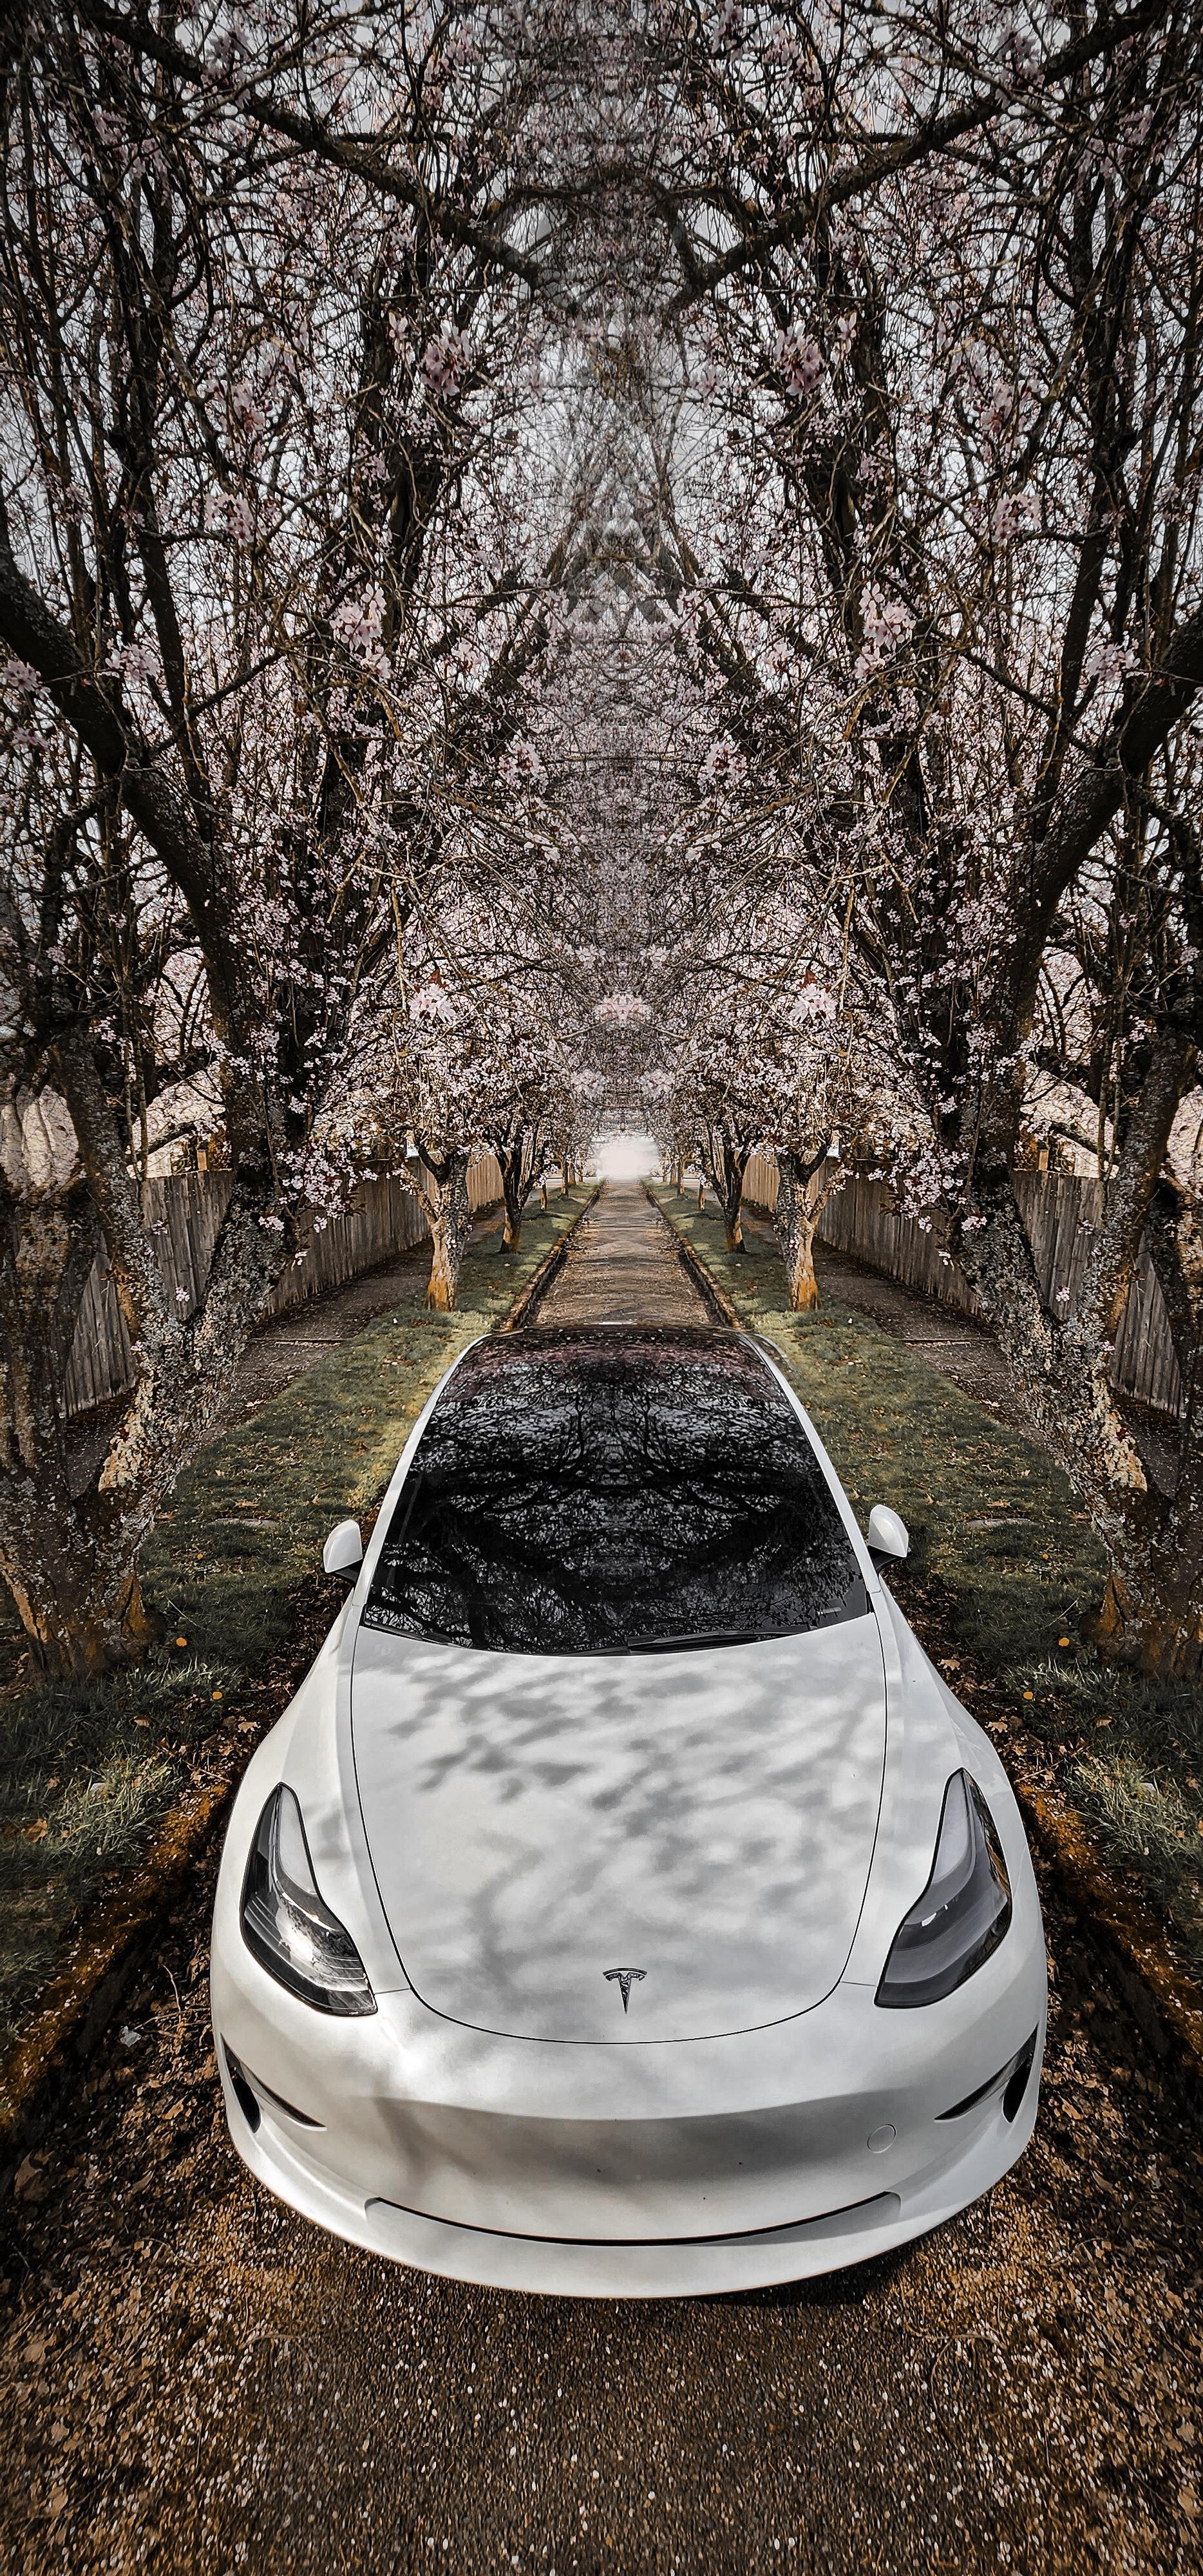 Wallpaper Edit Of My Model3 And Some Cherry Blossom Trees R